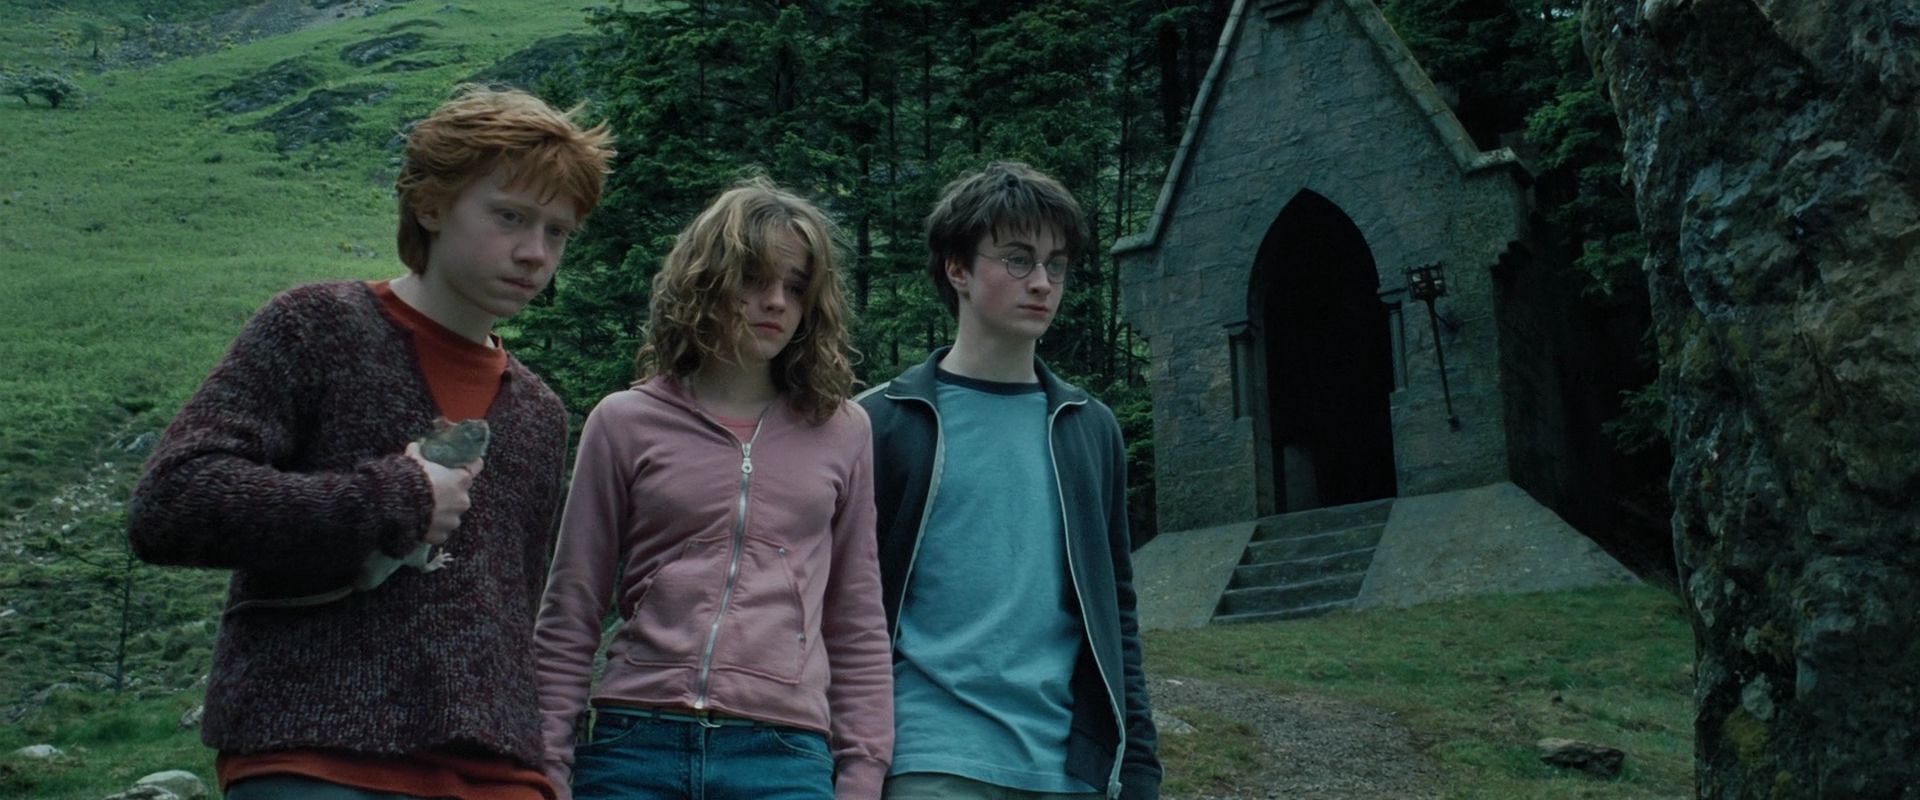 Images of Harry Potter And The Prisoner Of Azkaban | 1920x800